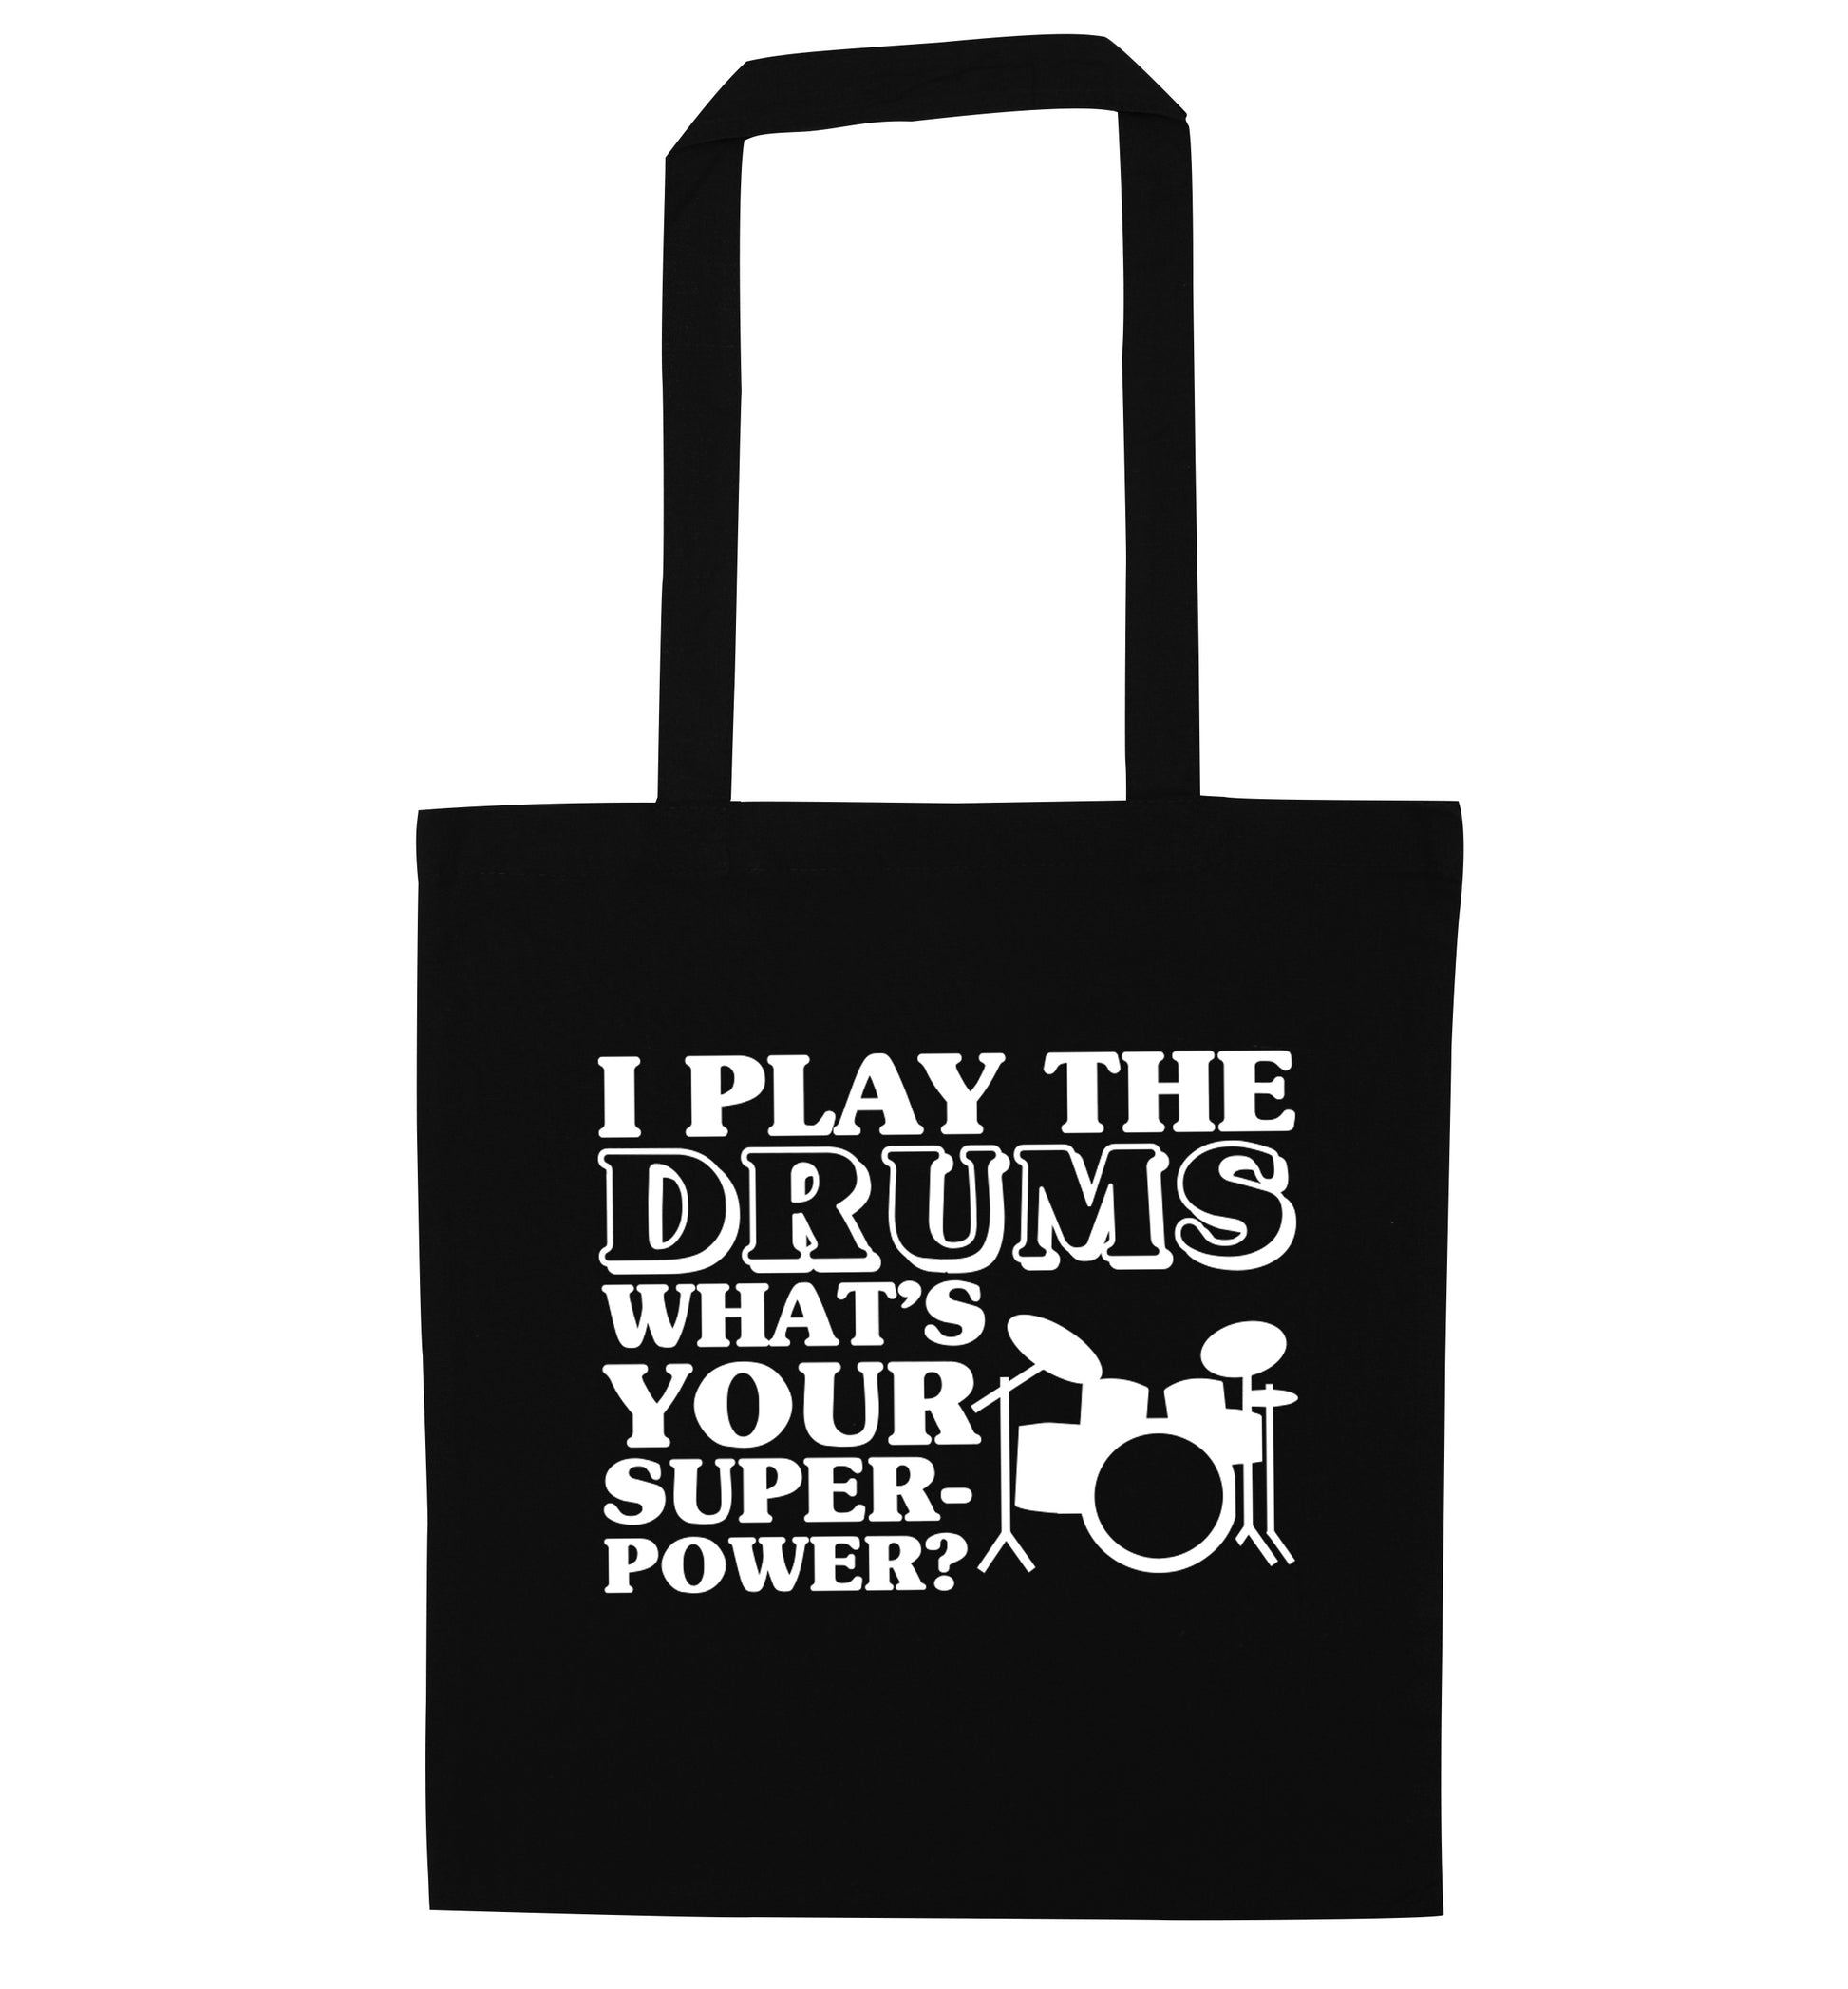 I play the drums what's your superpower? black tote bag